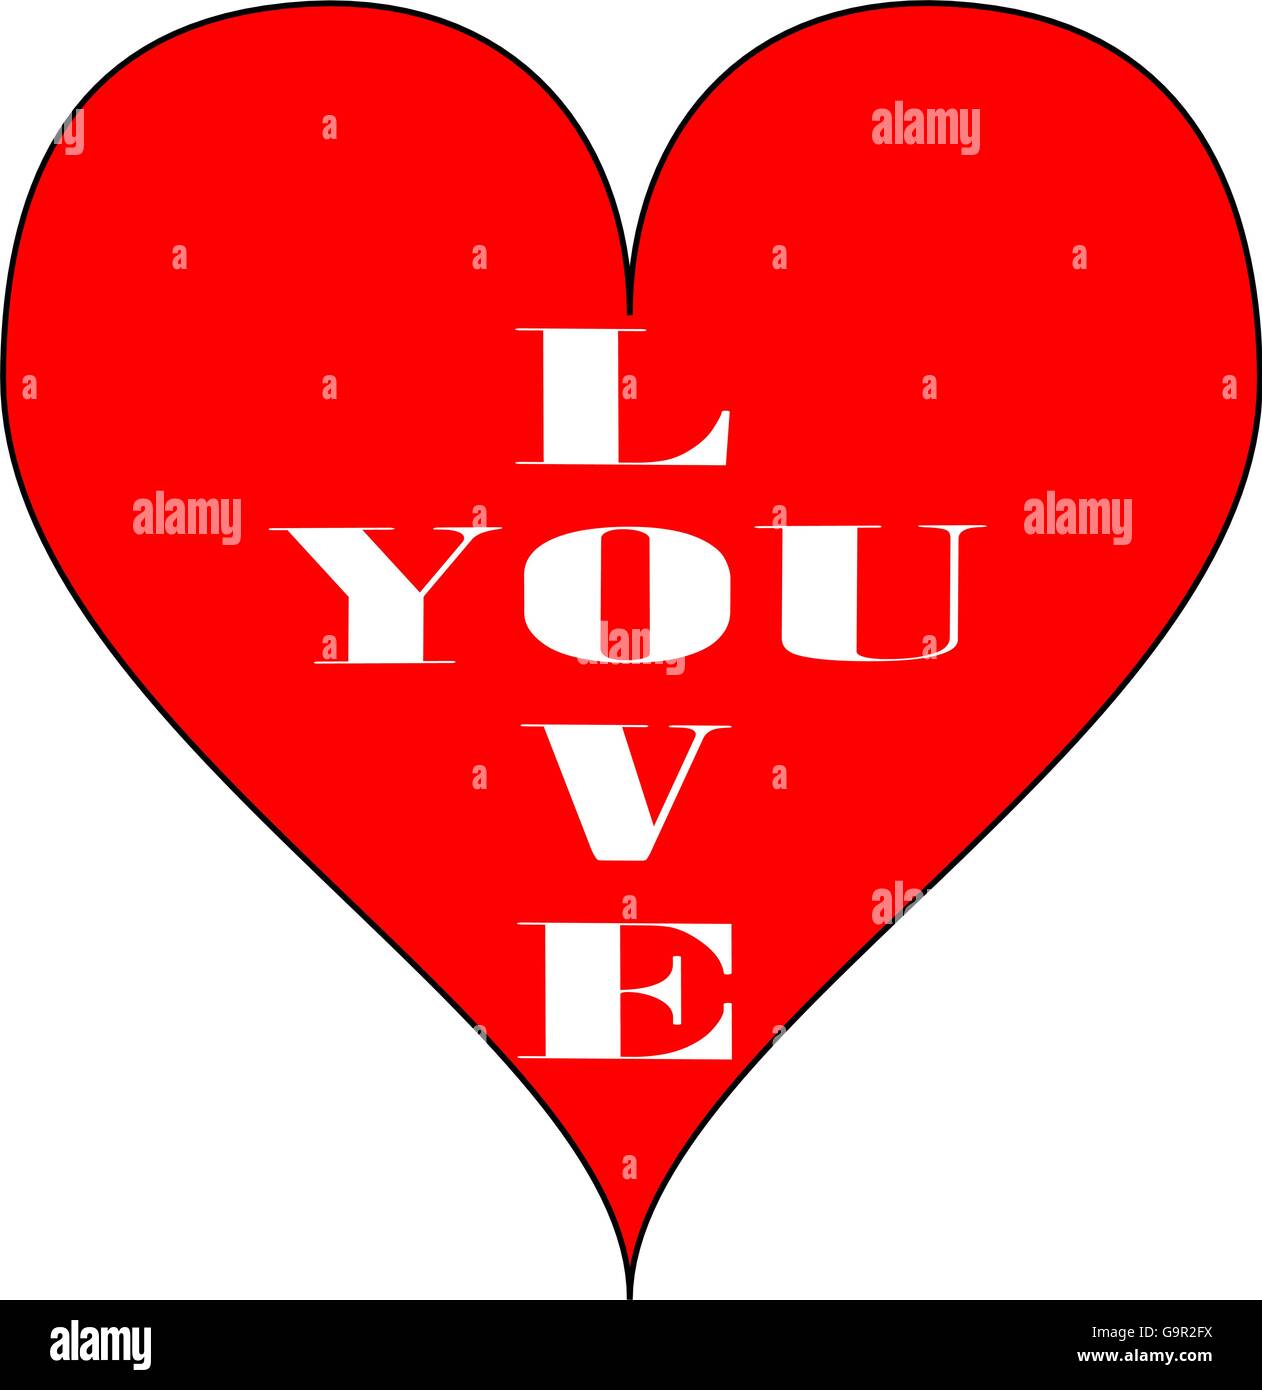 Simple red heart. 'Love you' written inside. Isolated over a white background. Vector. Stock Vector